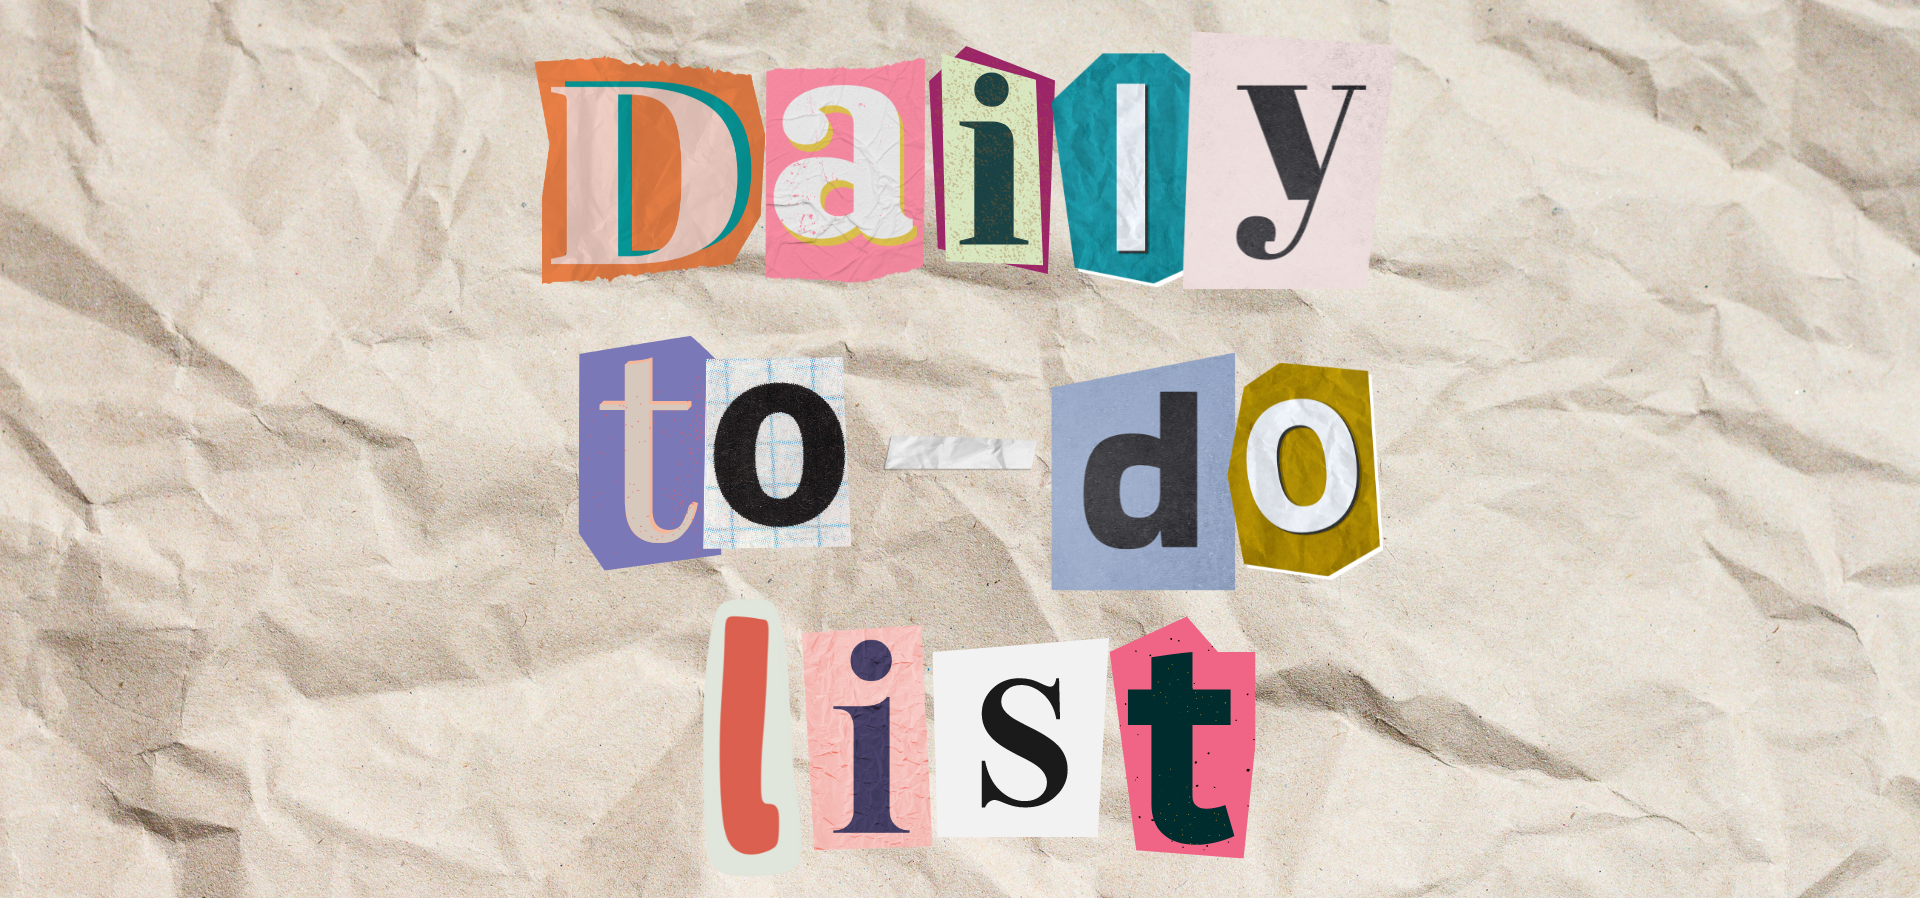 Cut-out letters on crumpled paper spelling &quot;Daily to do list&quot;